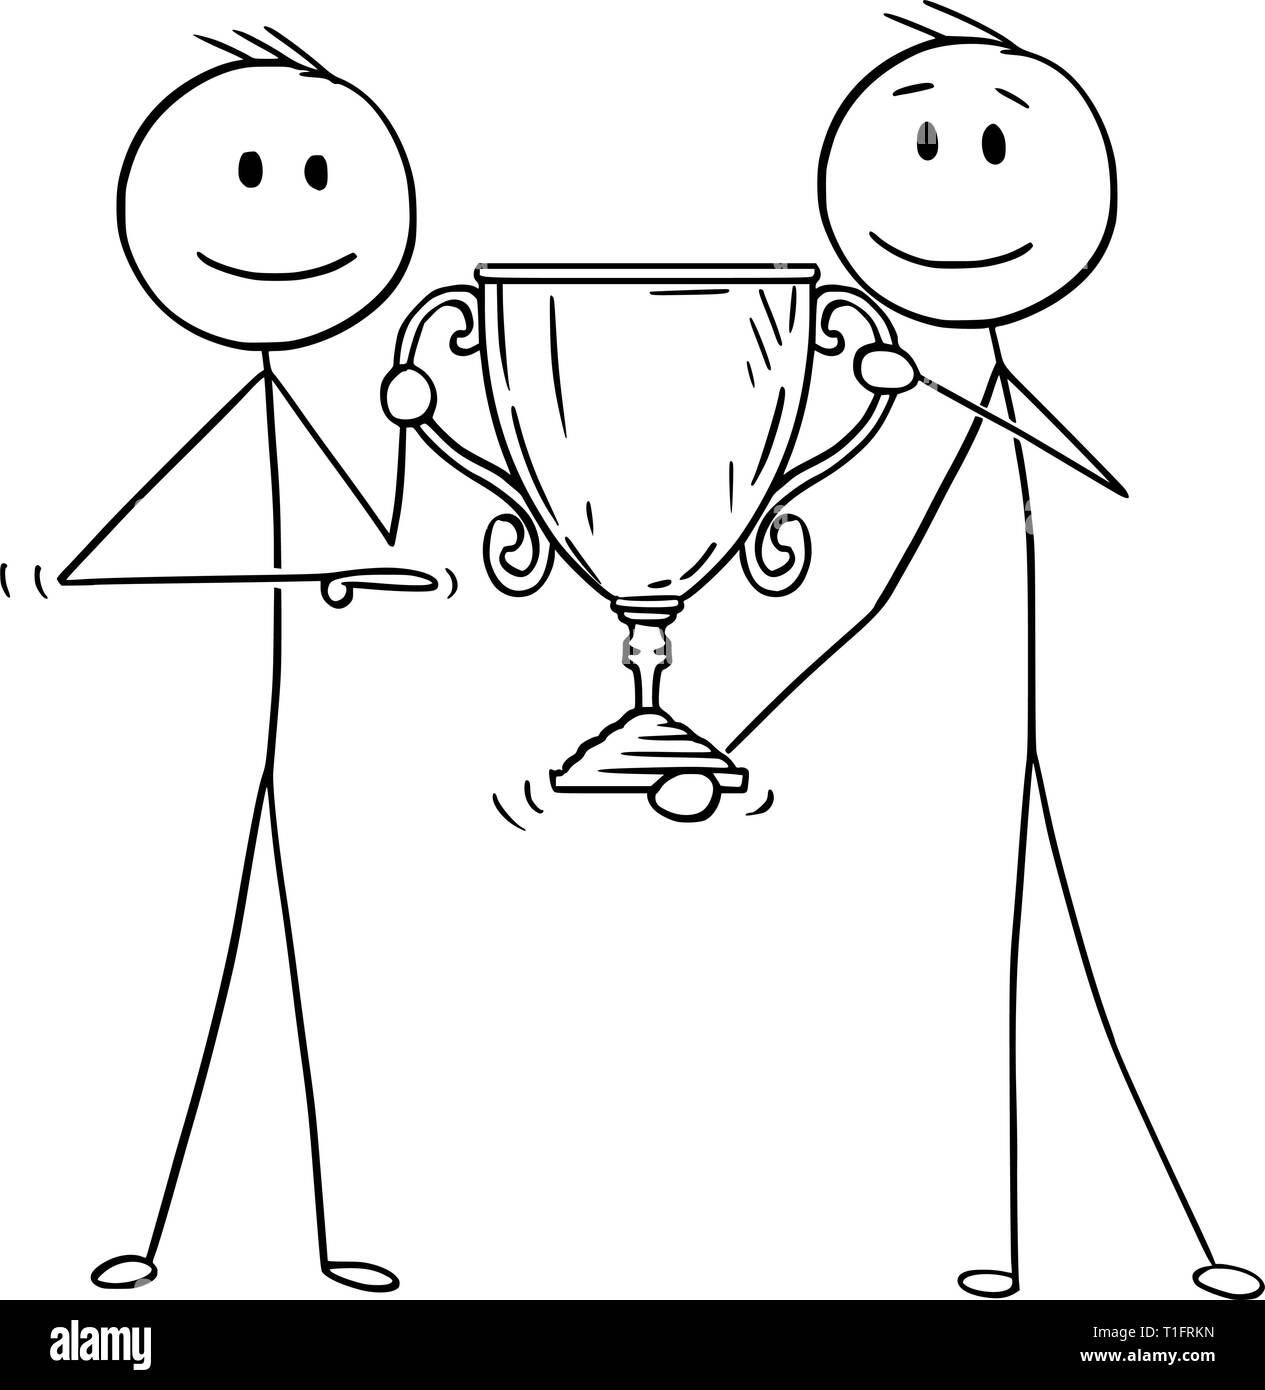 Cartoon stick figure drawing conceptual illustration of two men or businessmen holding together trophy cup for winner. Business concept of success and competition. Stock Vector